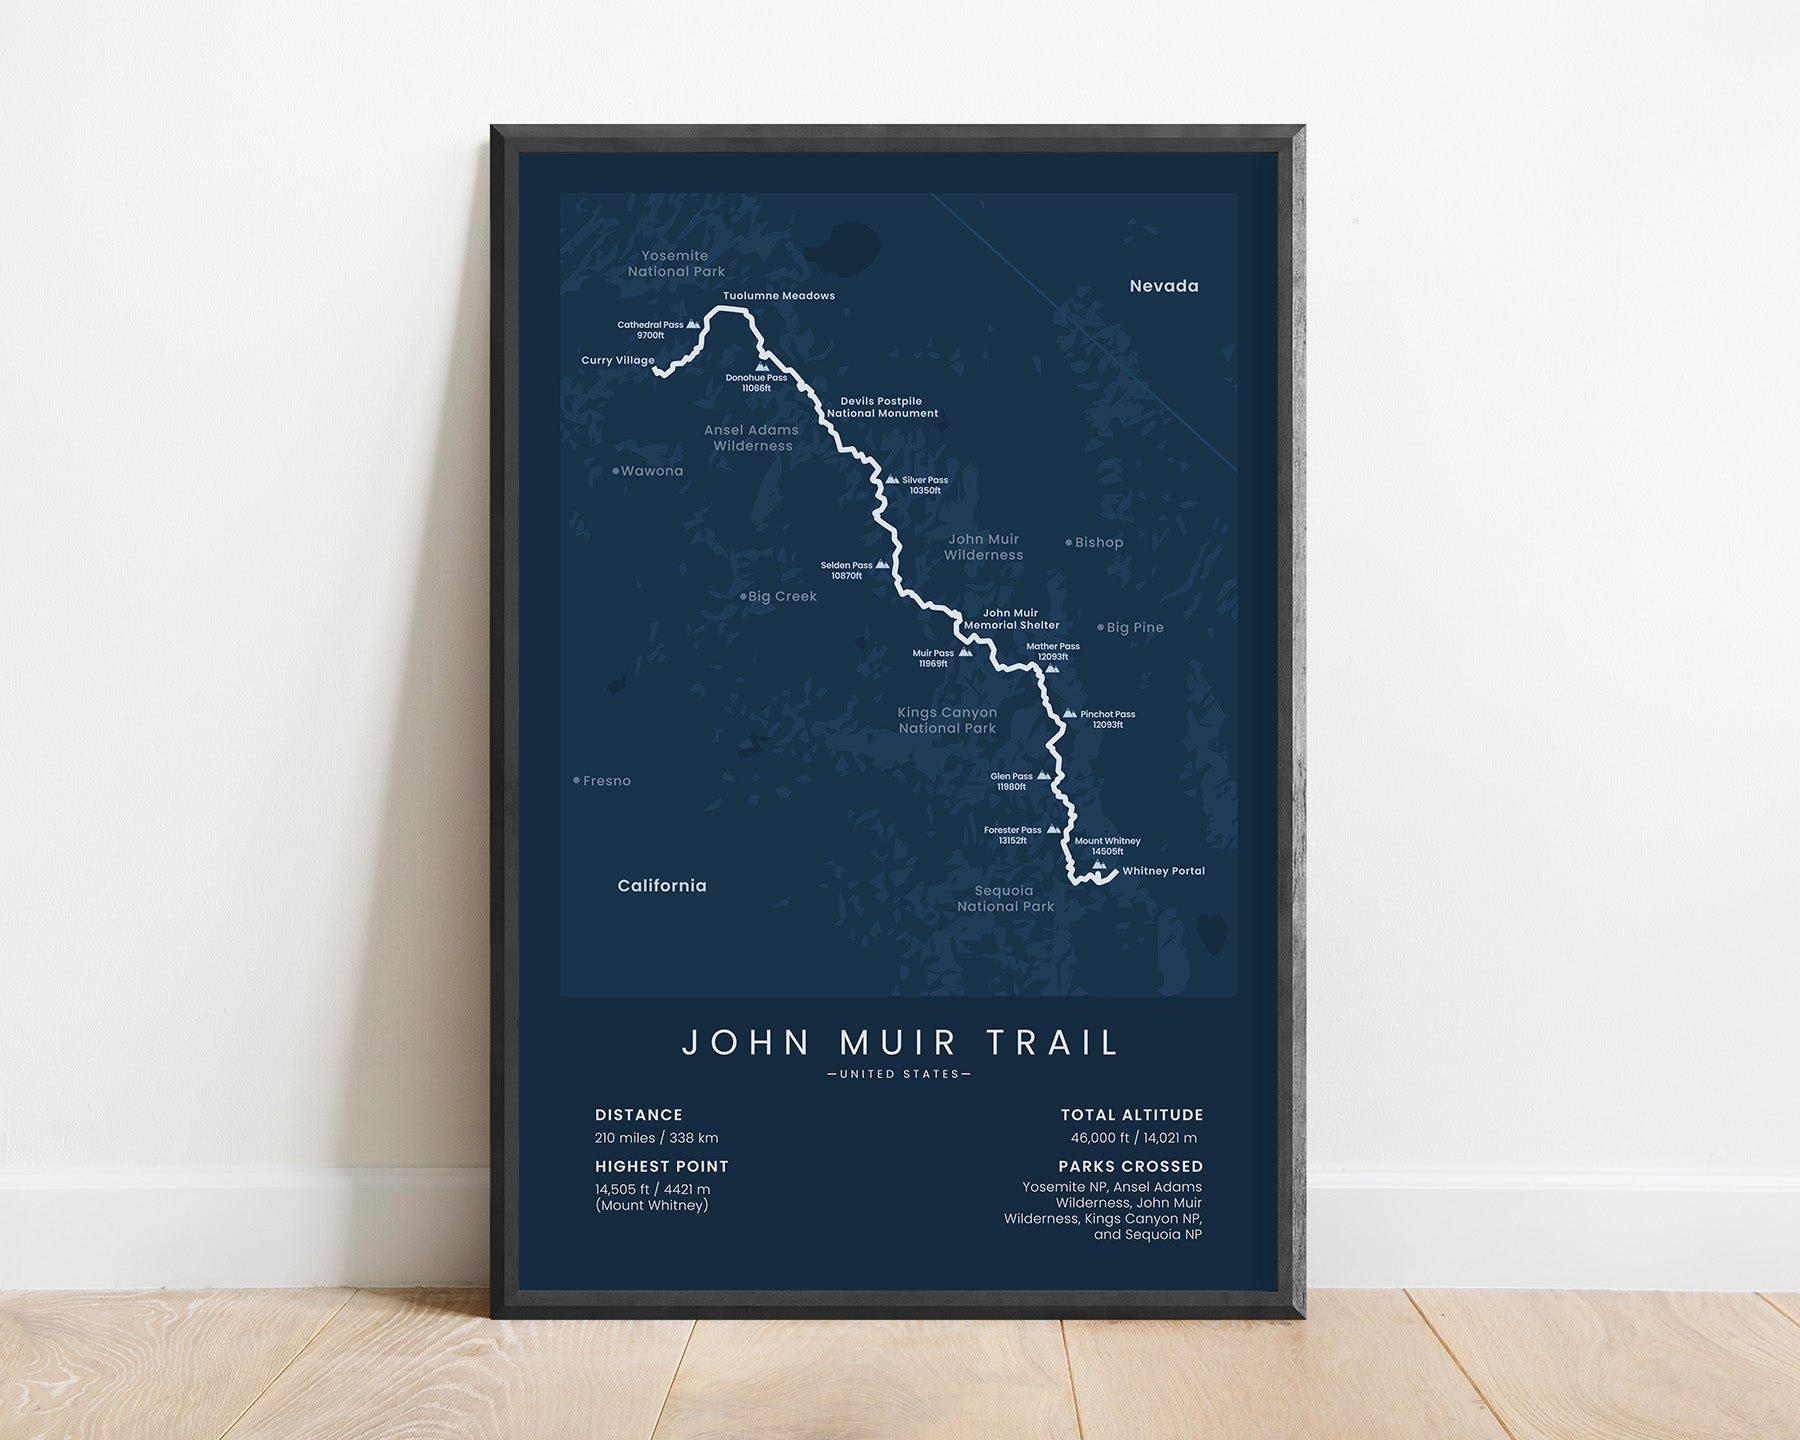 John Muir hiking trail (Crossing Yosemite, Sequoia National Park, King's Canyon, and Sierra Nevada mountain range) poster with blue background